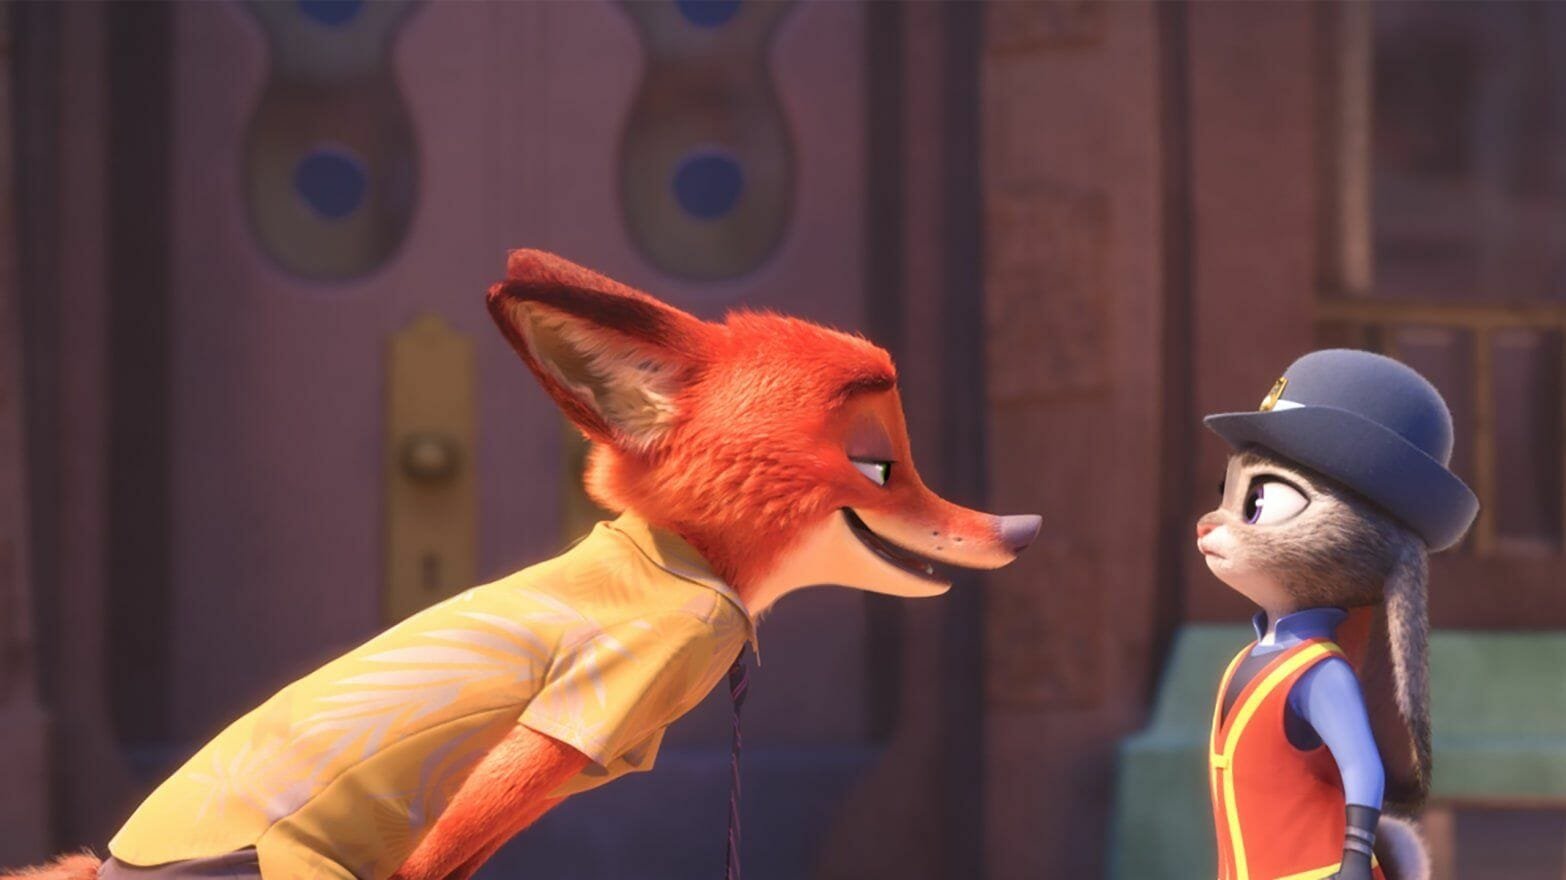 Zootopia 2: Is There Any Official Trailer For Zootopia 2